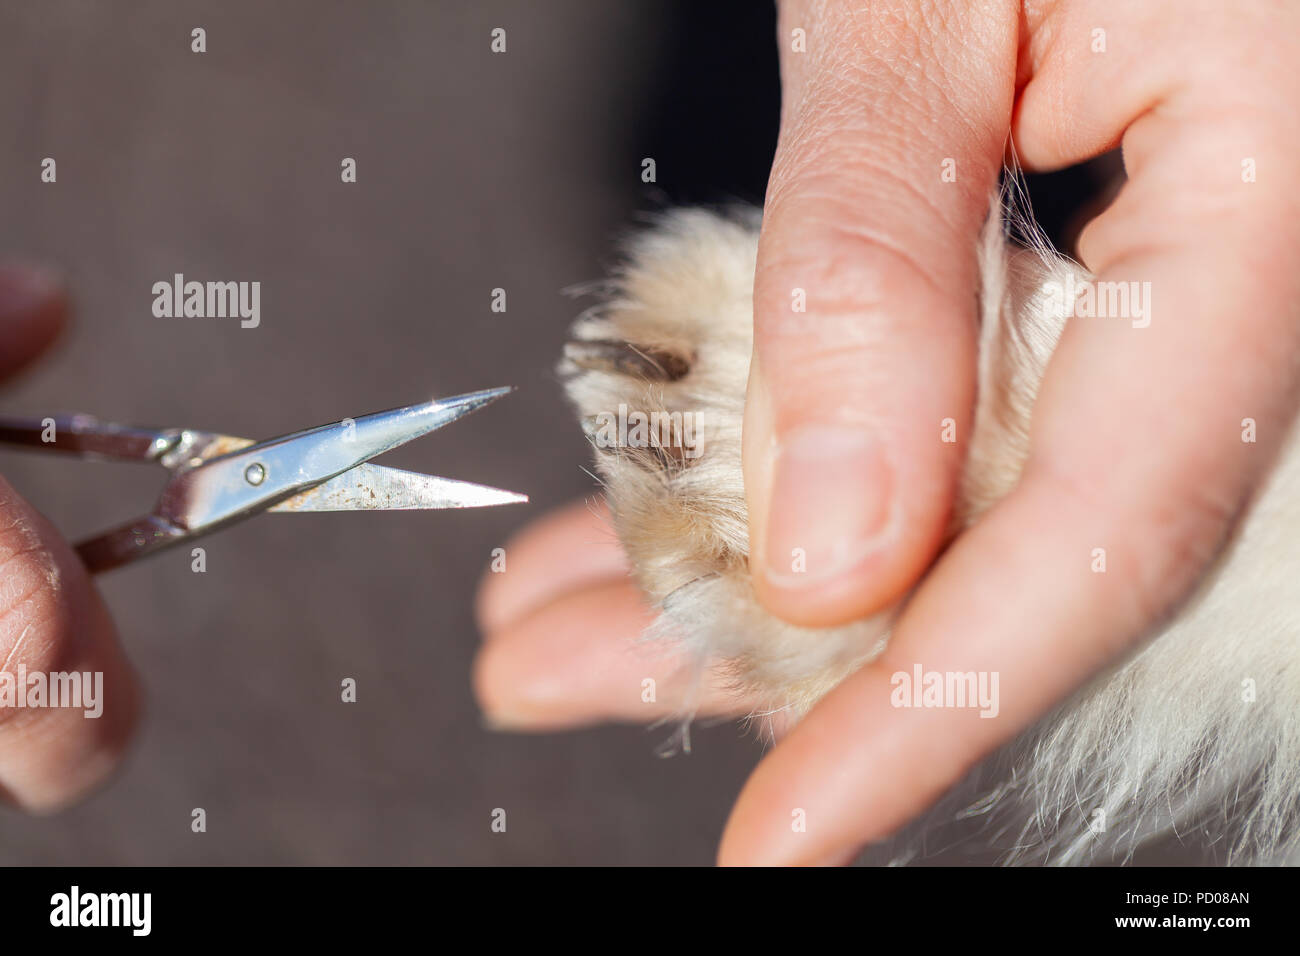 Nail care with a scissor on a dog paw Stock Photo